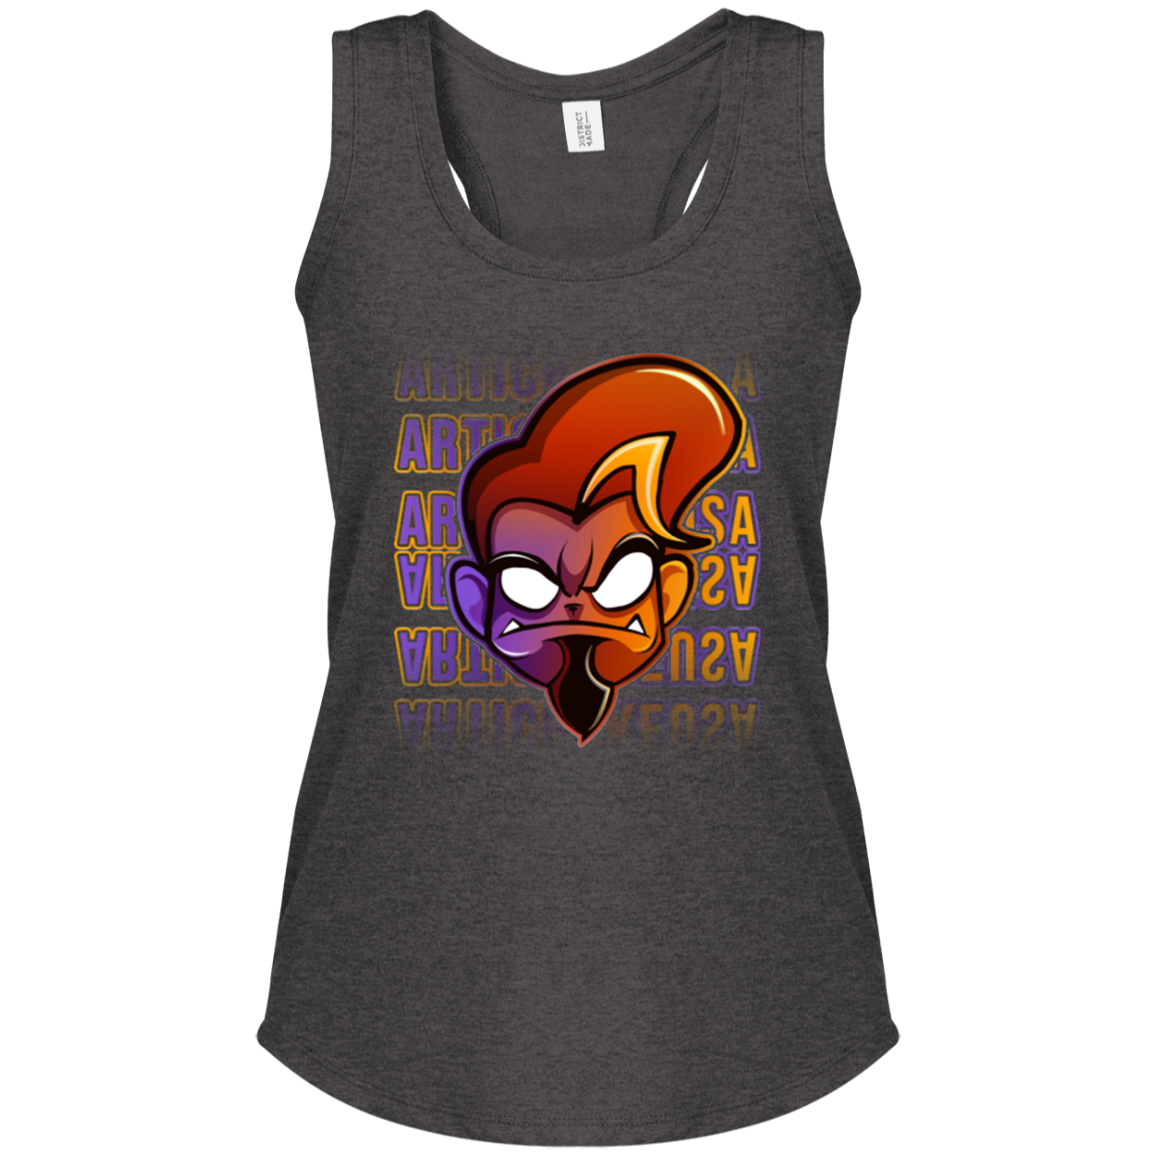 ArtichokeUSA Character and Font design. Let's Create Your Own Team Design Today. Arthur. Ladies' Tri Racerback Tank